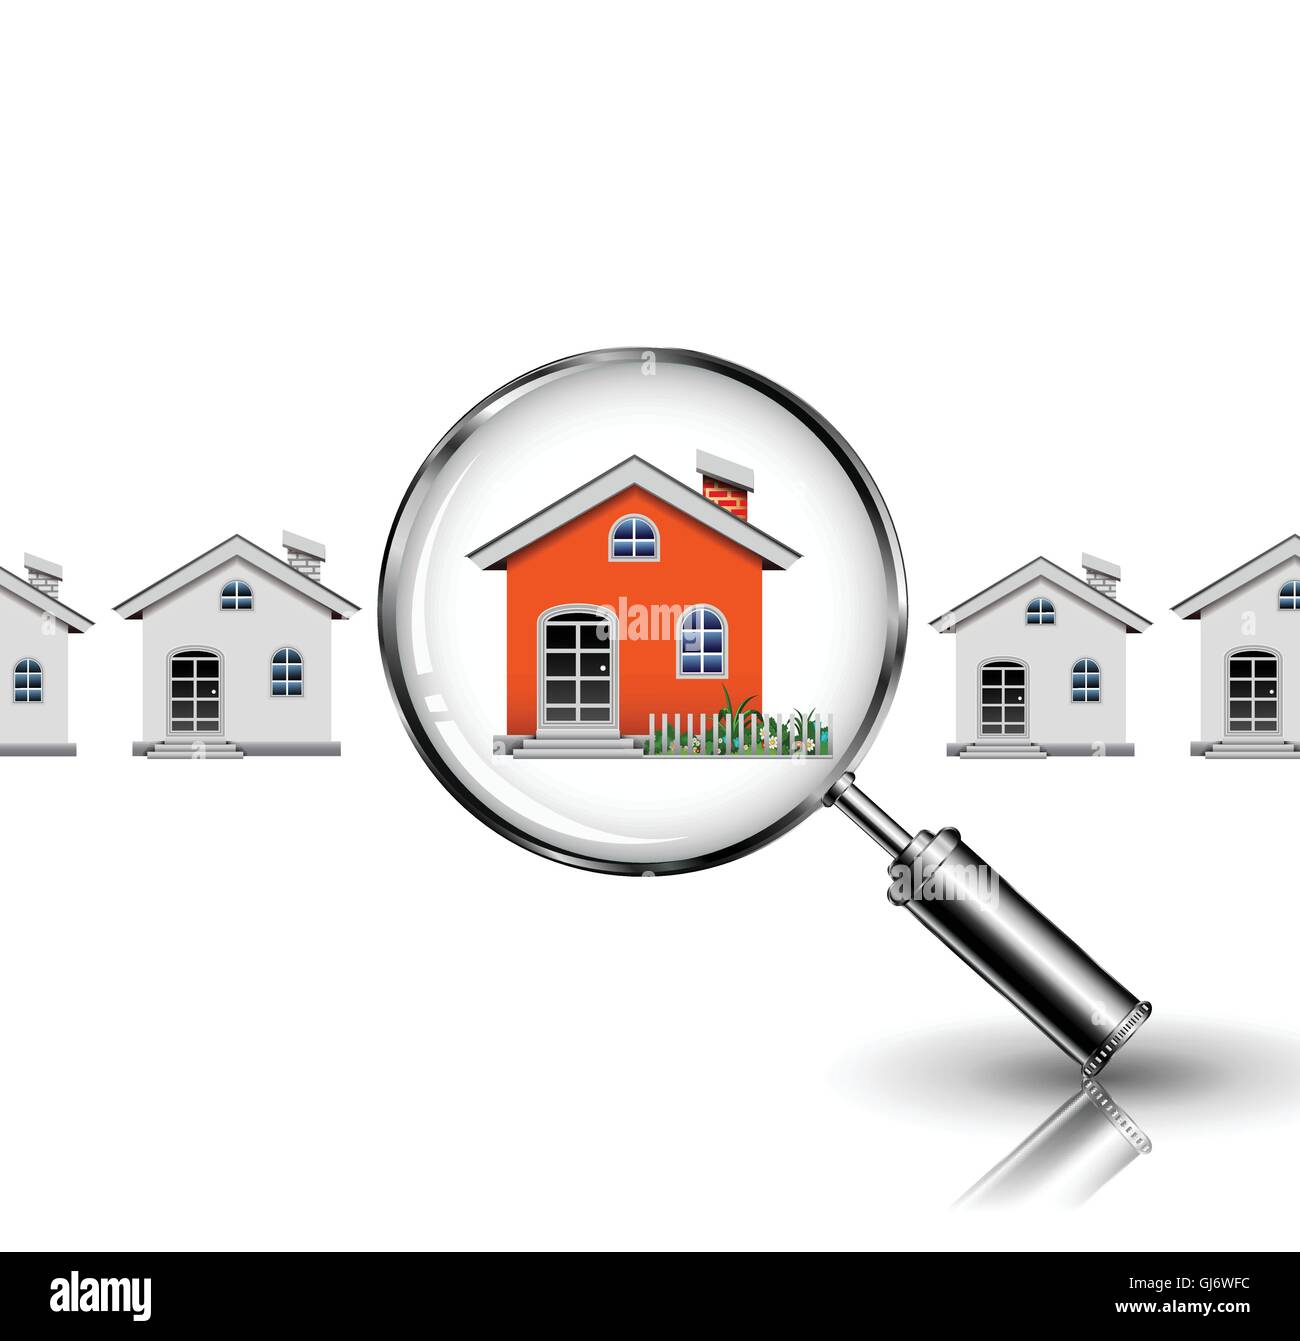 magnifying glass and your dream house Stock Vector